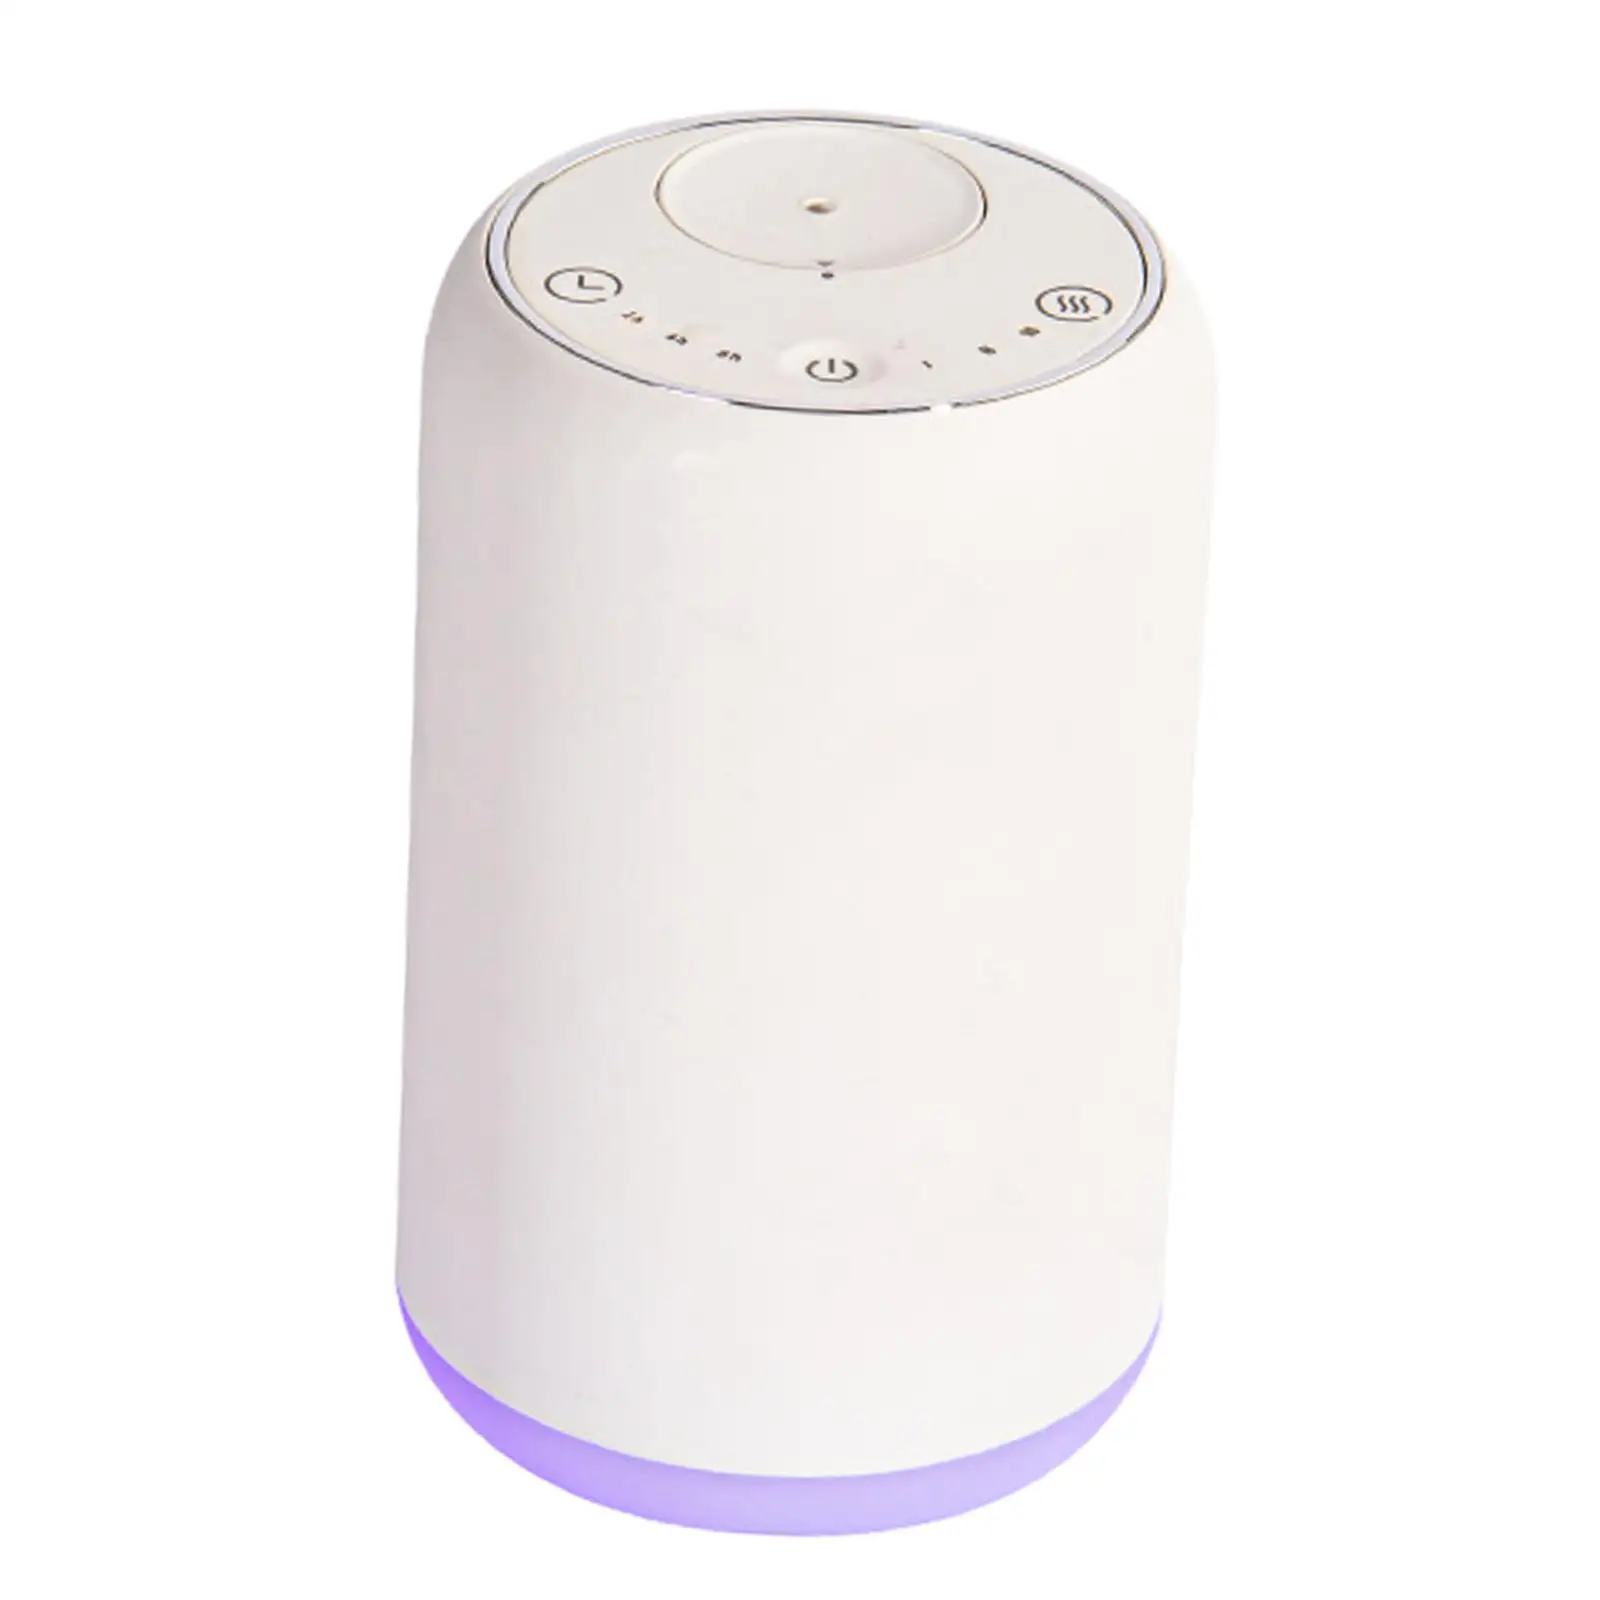 Essential Oil Diffusers Aromatherapy Oil Diffuser for Desktop Bedroom